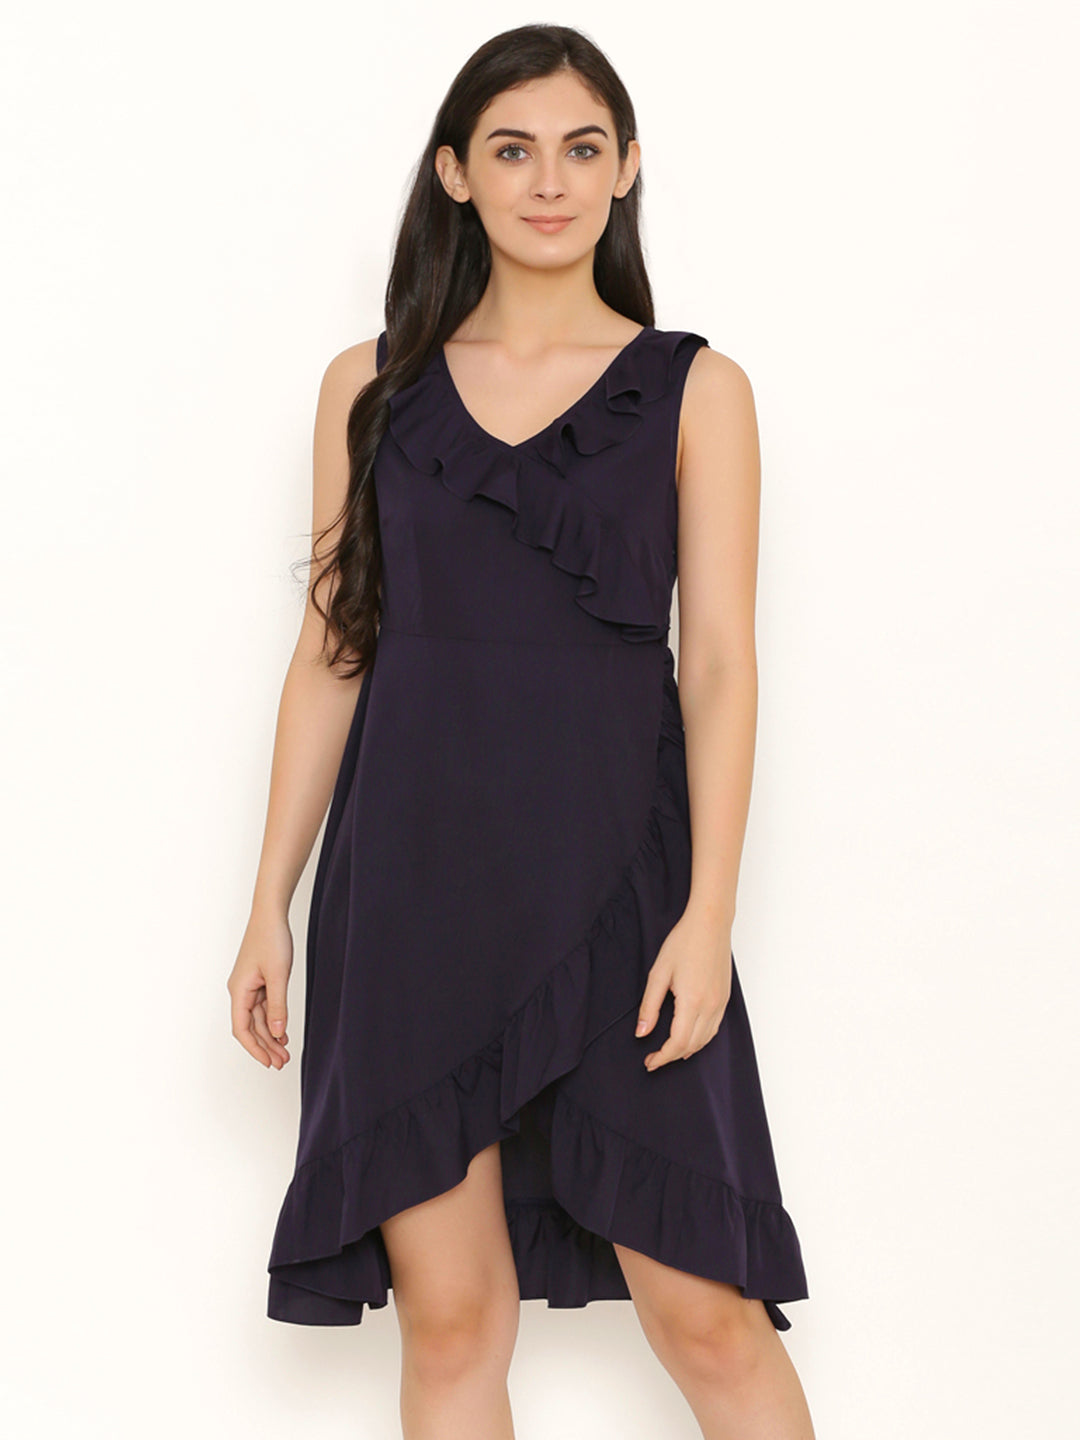 Overlap Dress with frill at neck and hem